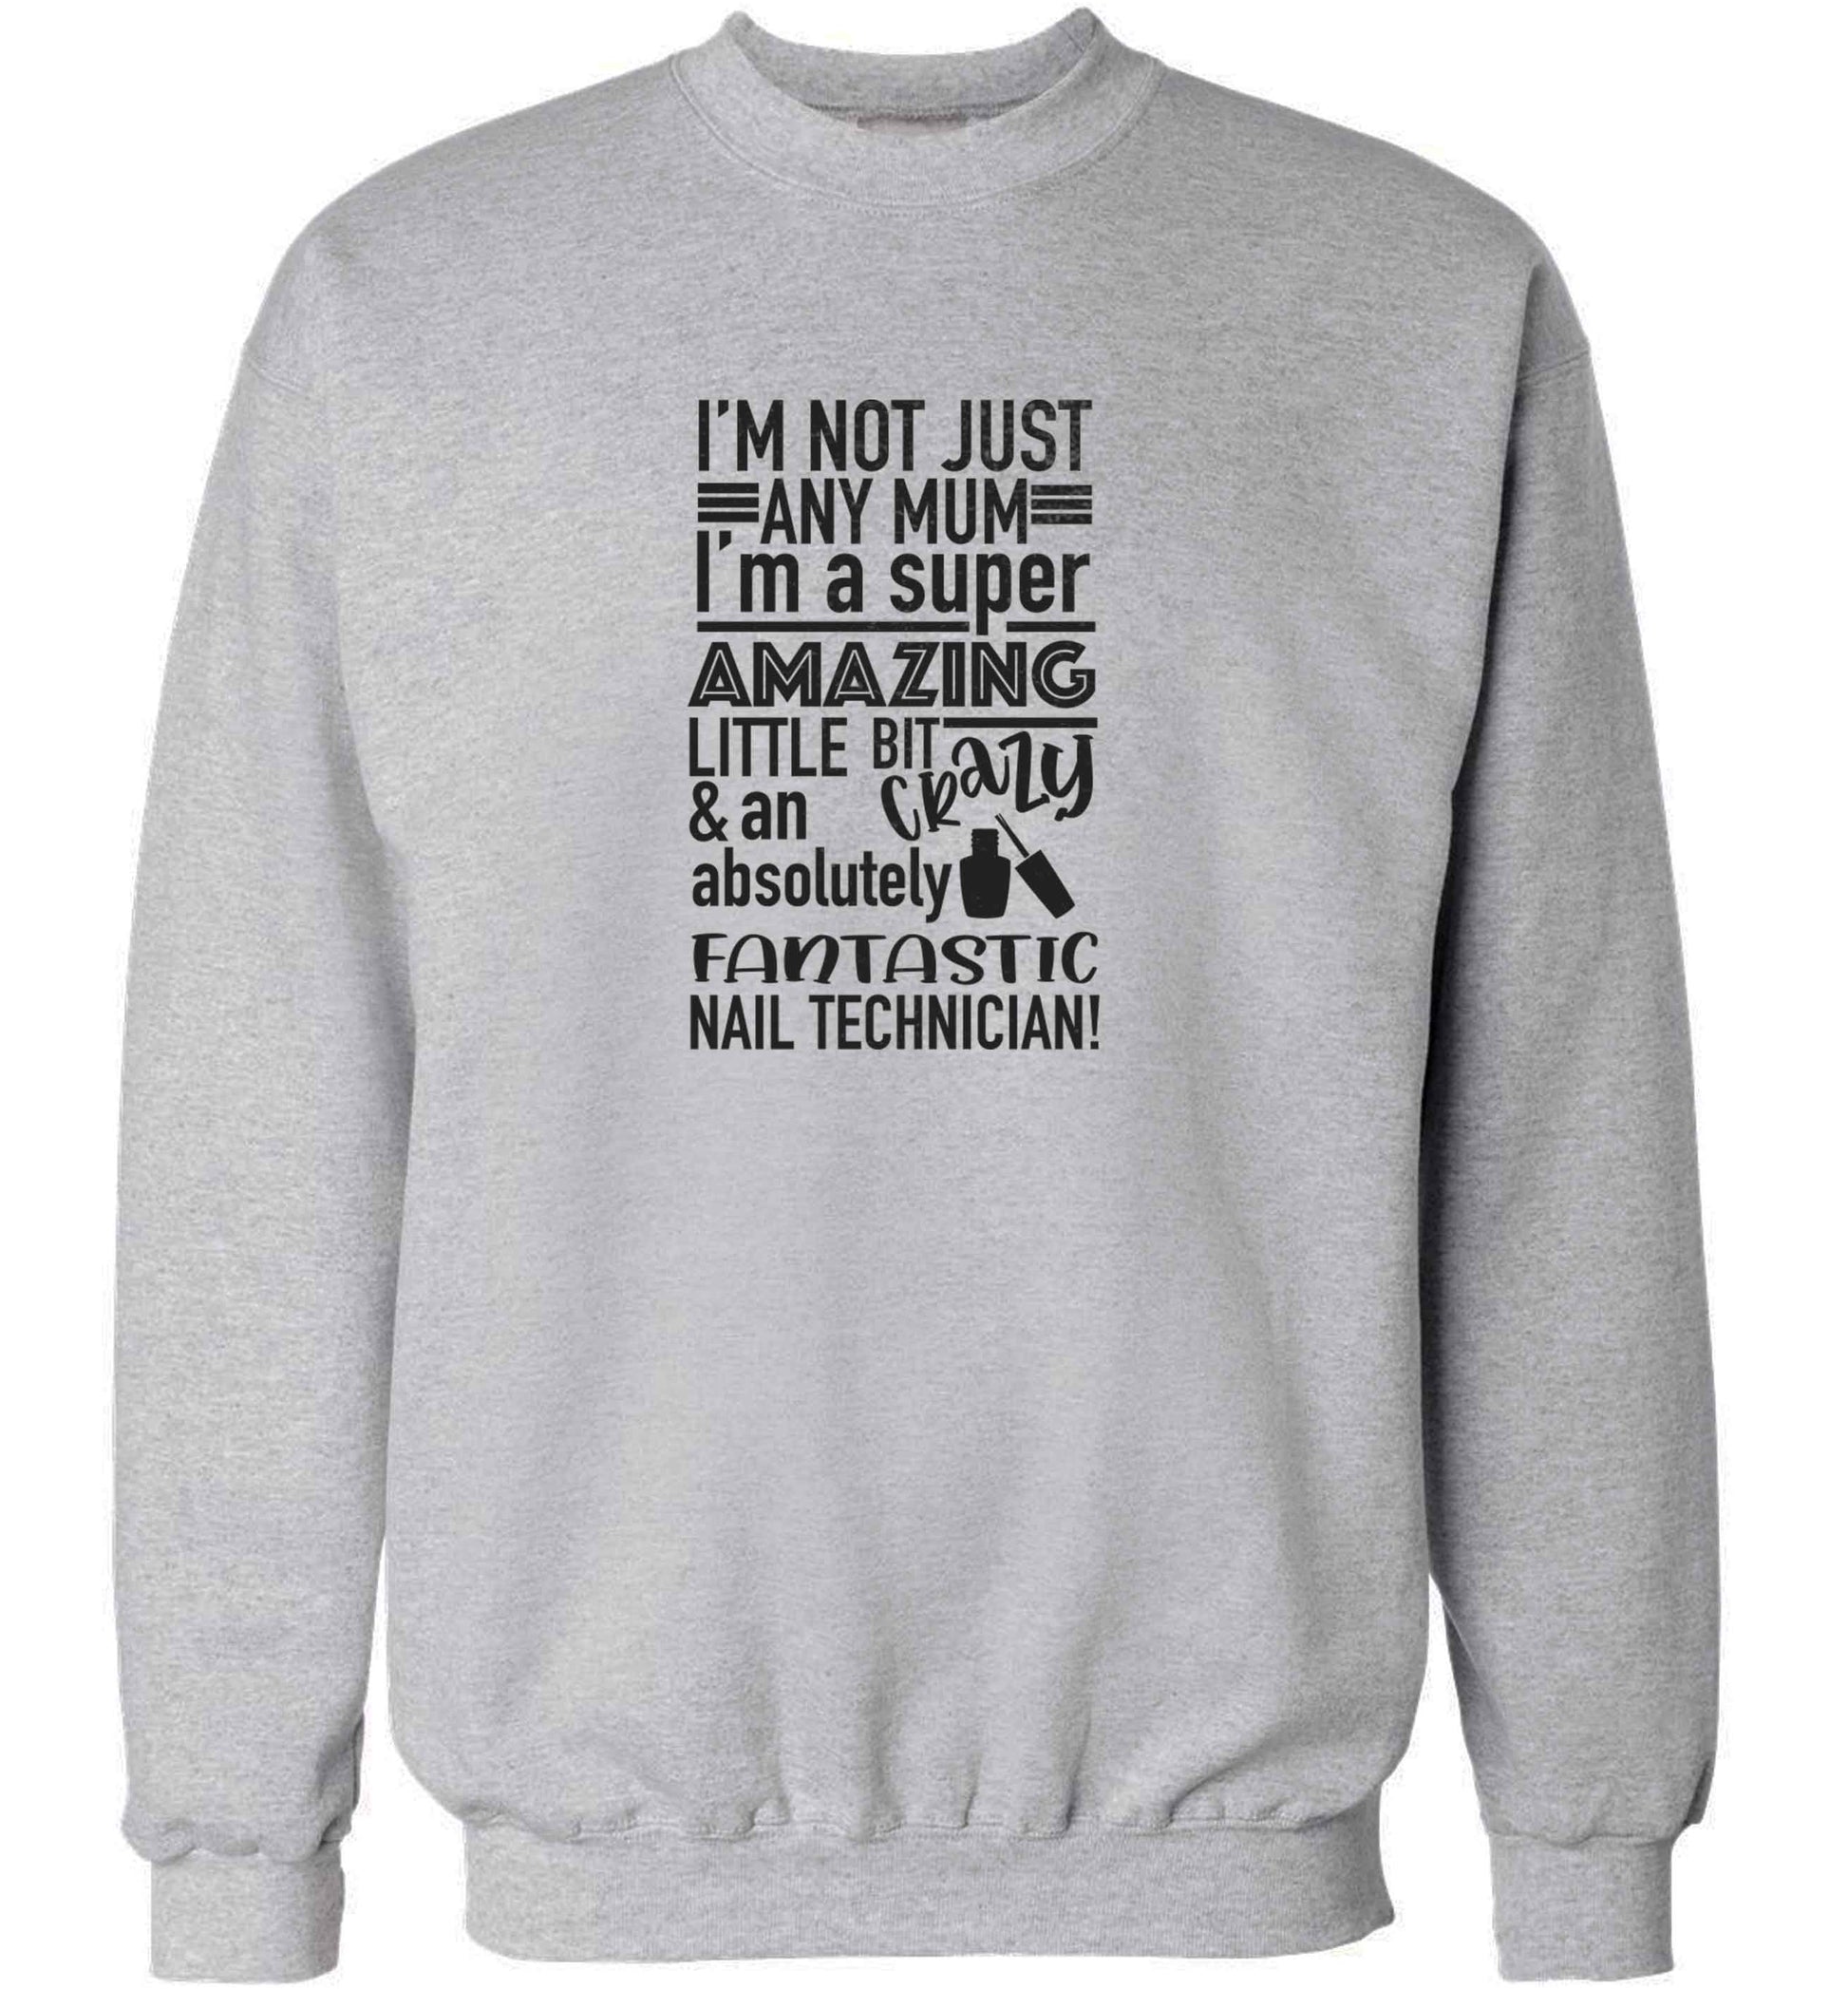 I'm not just any mum I'm a super amazing little bit crazy and an absolutely fantastic nail technician! adult's unisex grey sweater 2XL